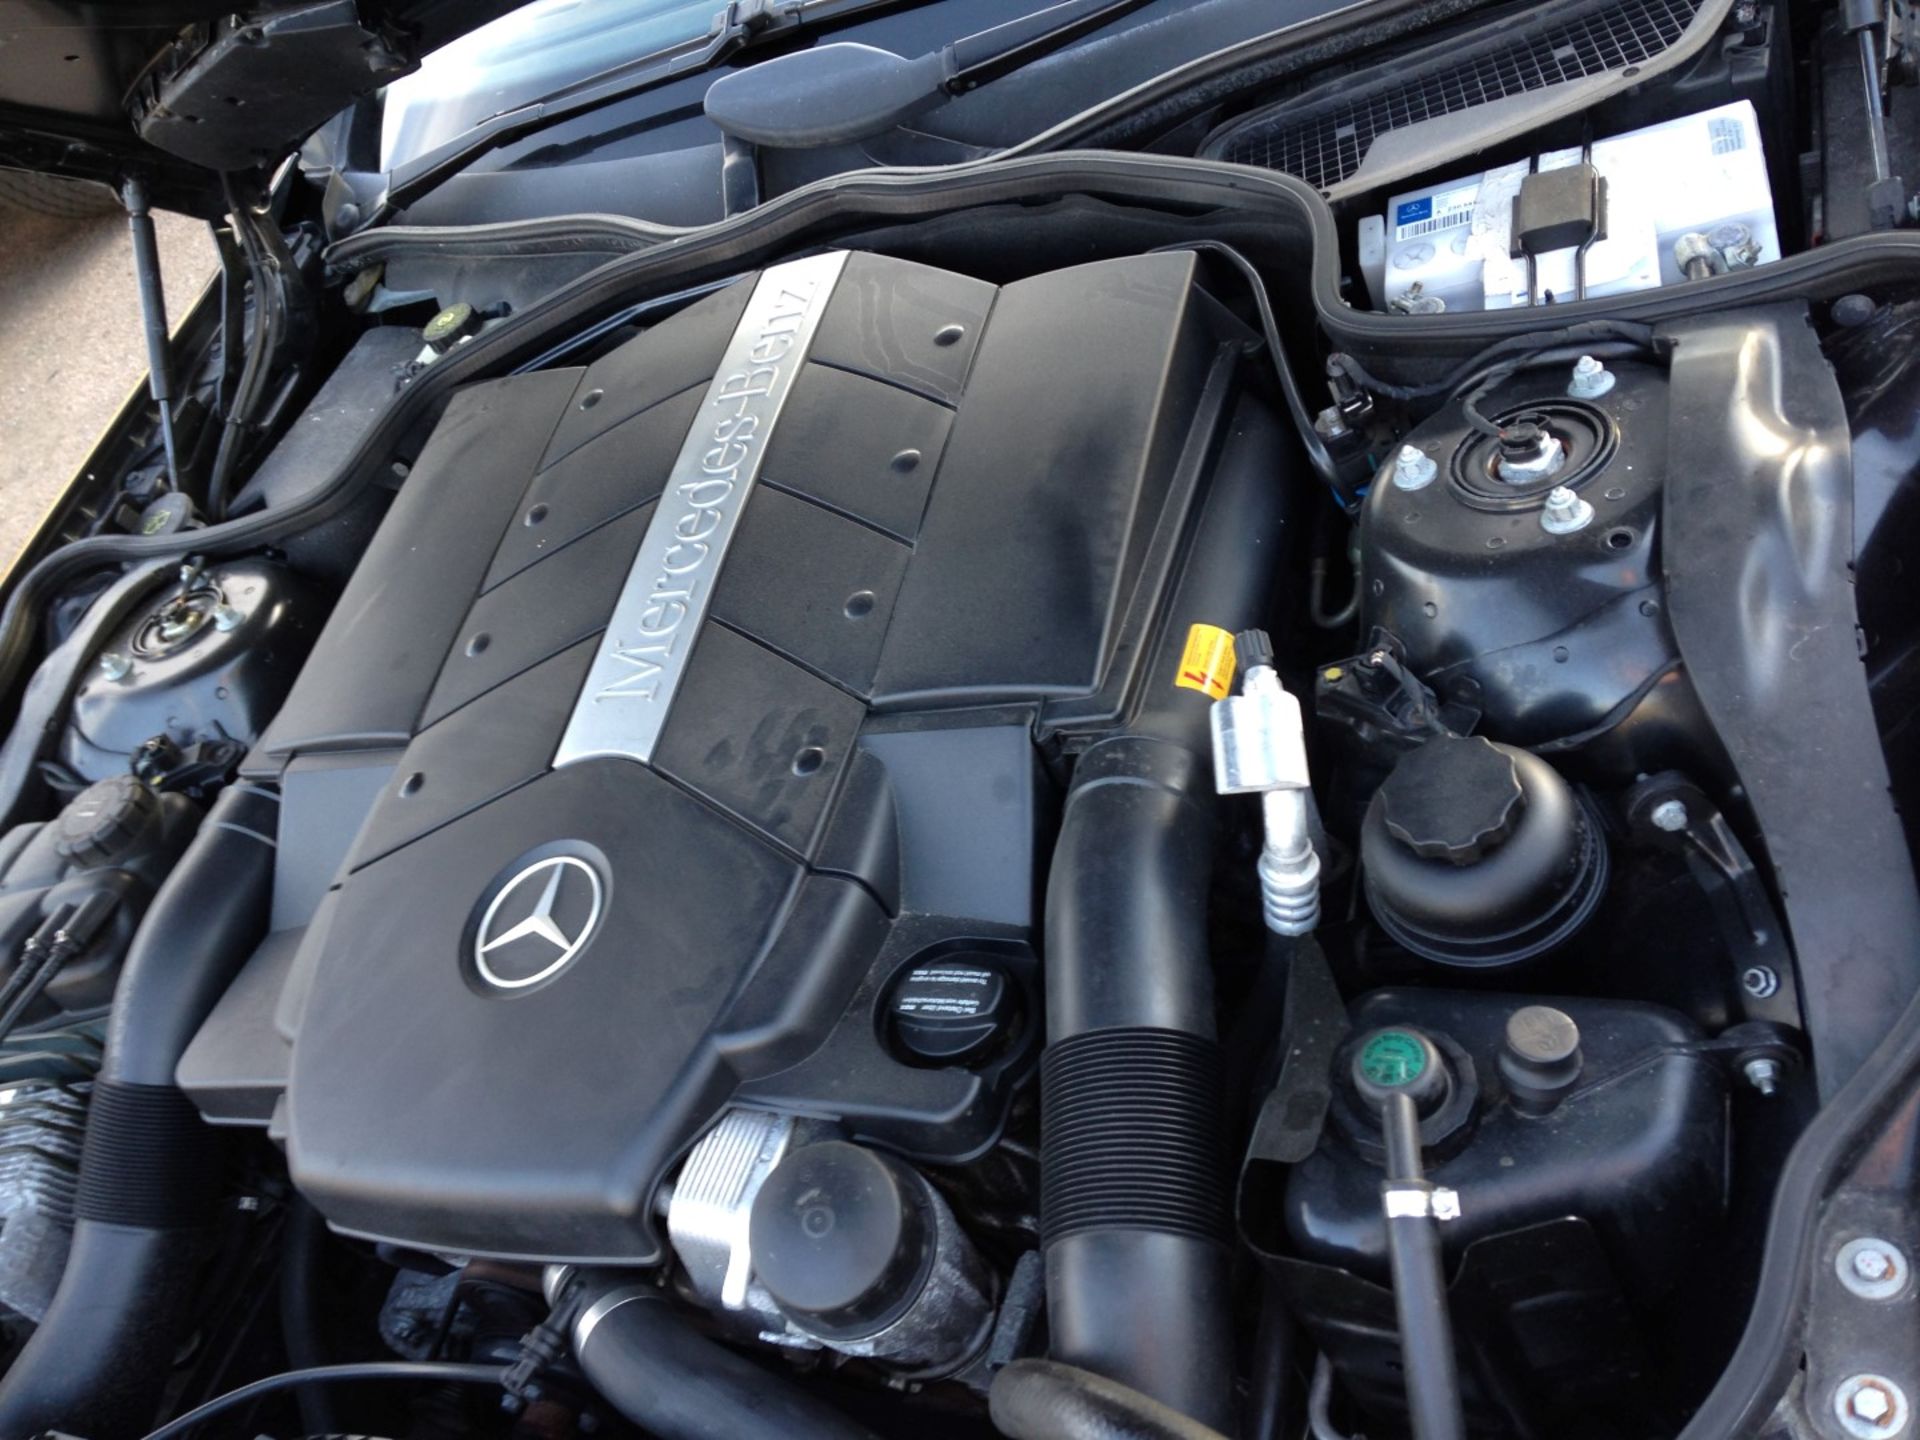 1 x Mercedes SL500 Automatic 5.0 Convertible - Petrol - Year 2002 - 94,500 Miles - Long MOT Expiry - Image 37 of 40